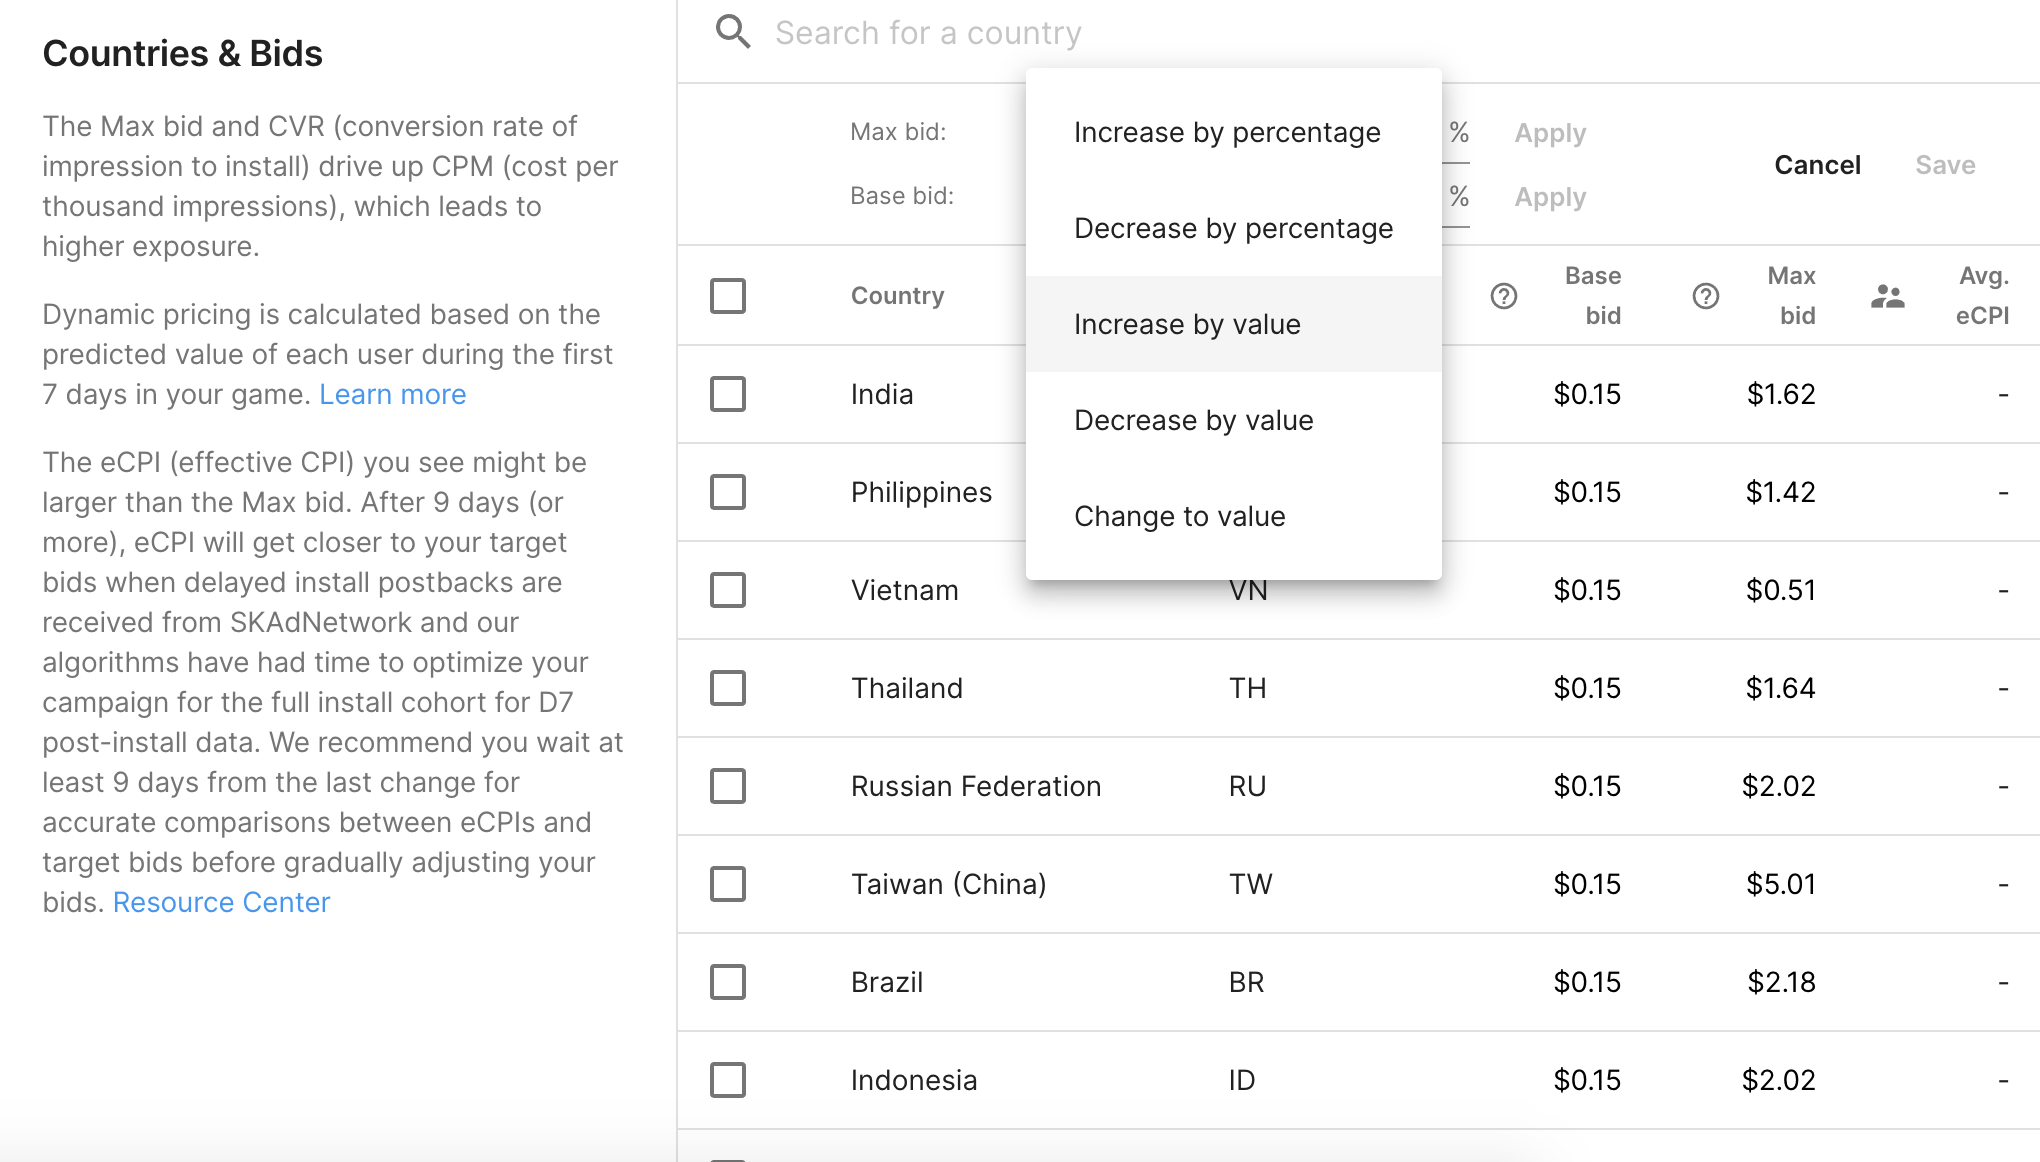 Countries and bids bulk changes to retention campaigns